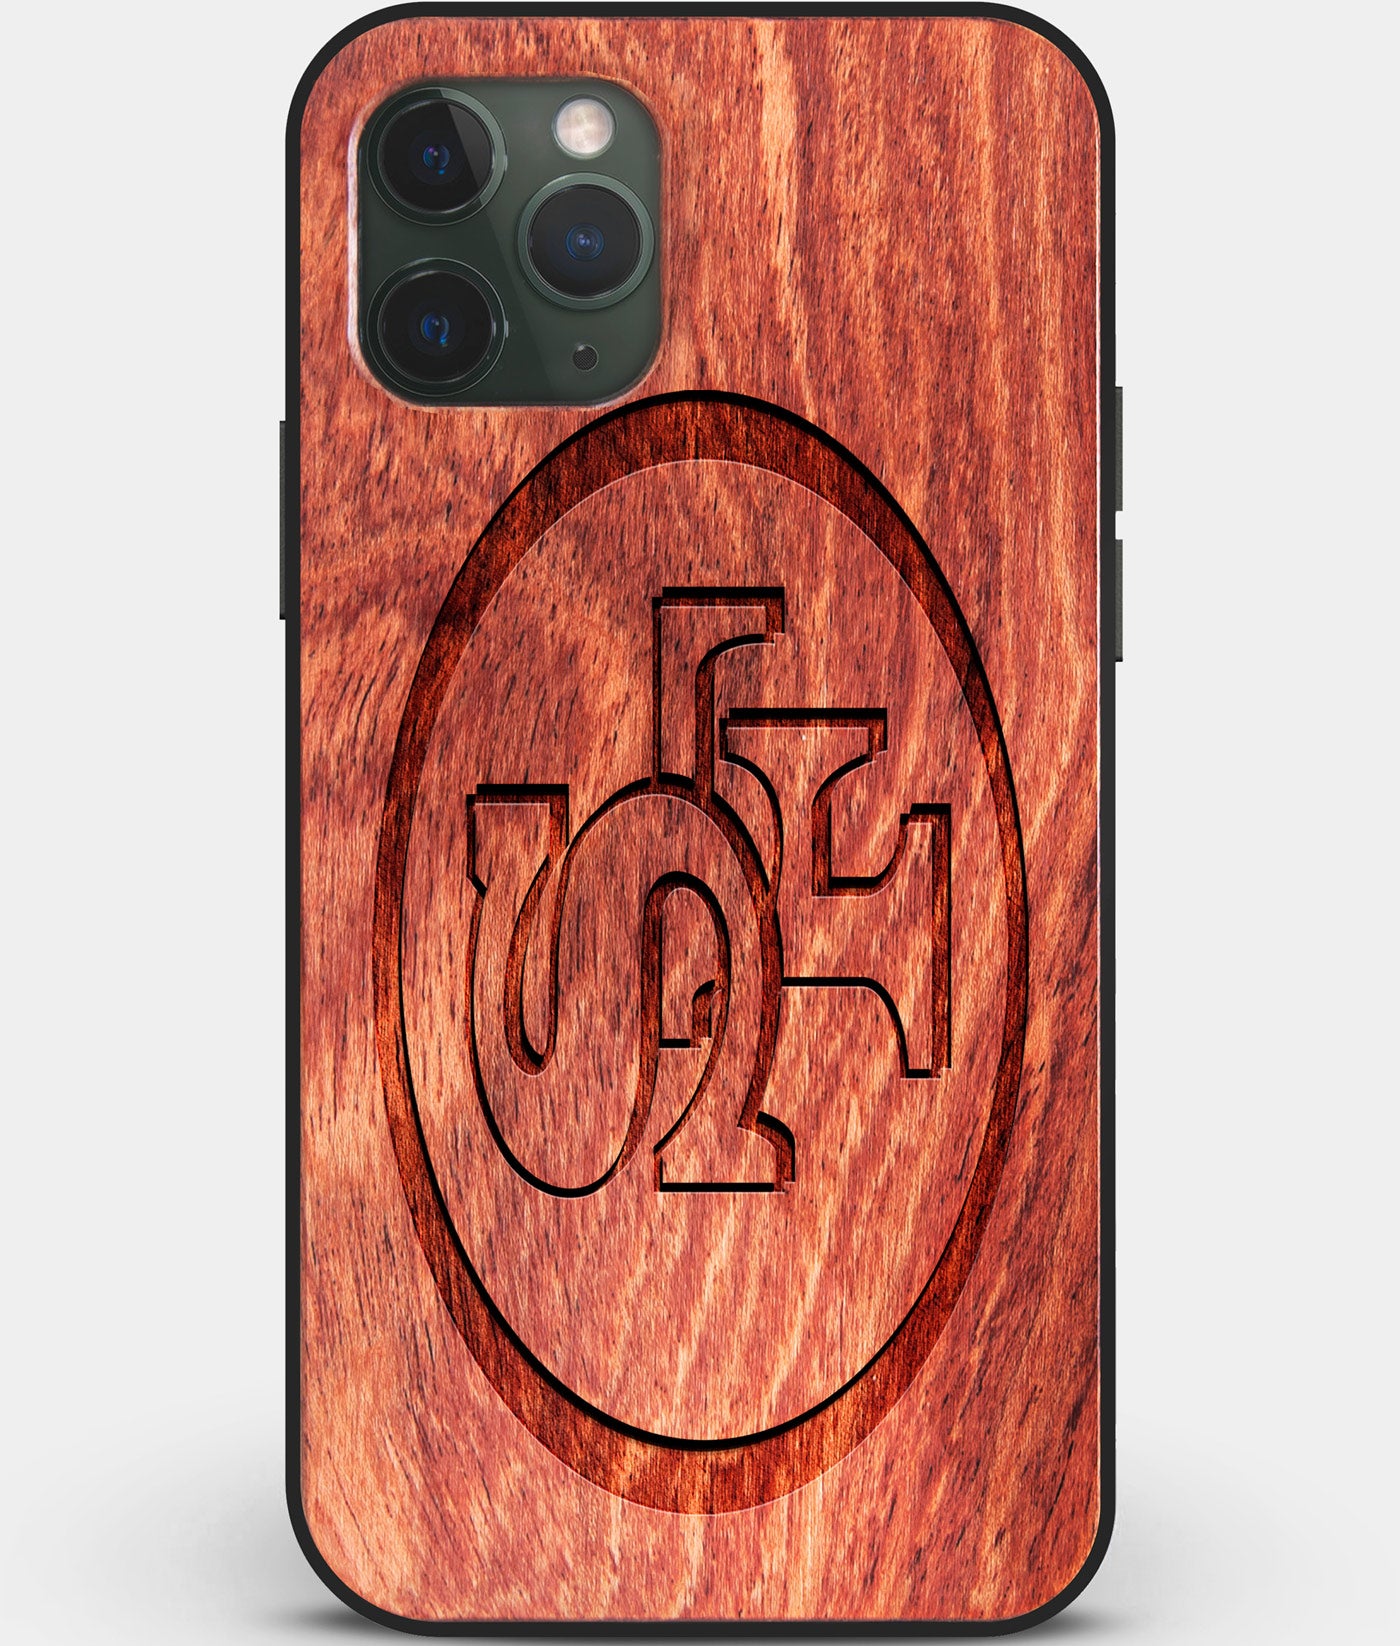 Custom Carved Wood San Francisco 49ers iPhone 11 Pro Case | Personalized Mahogany Wood San Francisco 49ers Cover, Birthday Gift, Gifts For Him, Monogrammed Gift For Fan | by Engraved In Nature